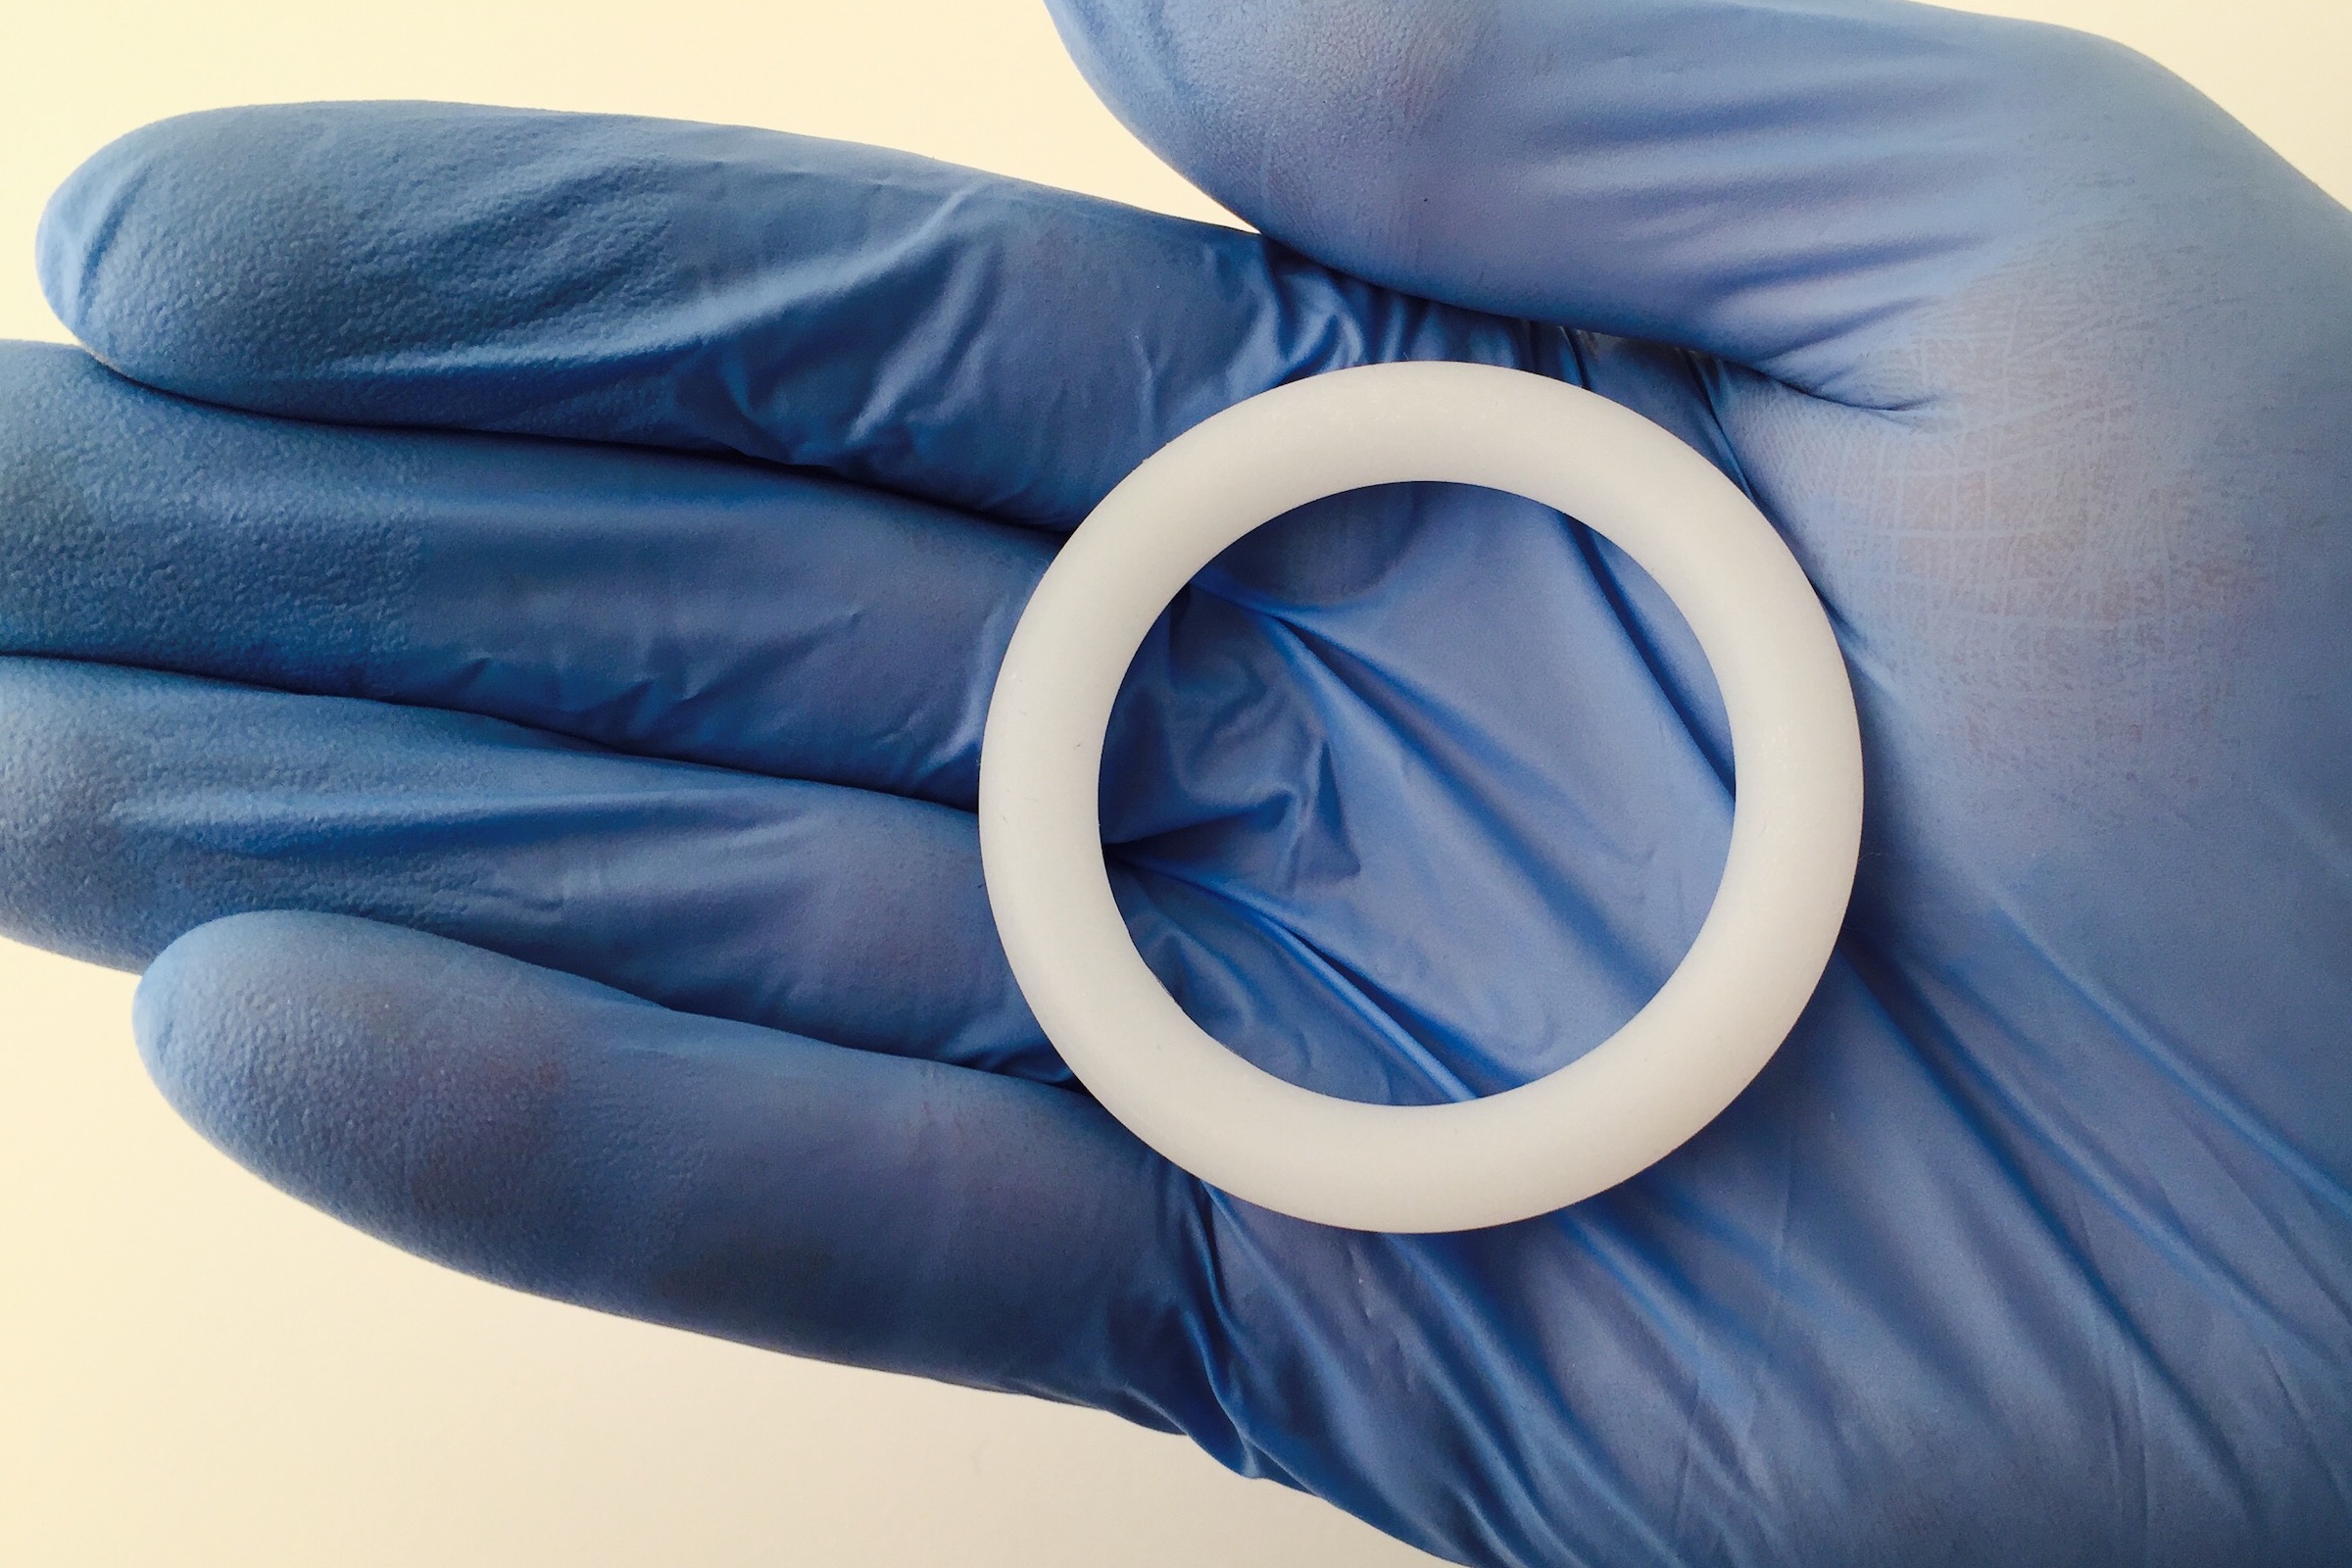 This Week in HIV Research Where the Rubber Meets the Ring